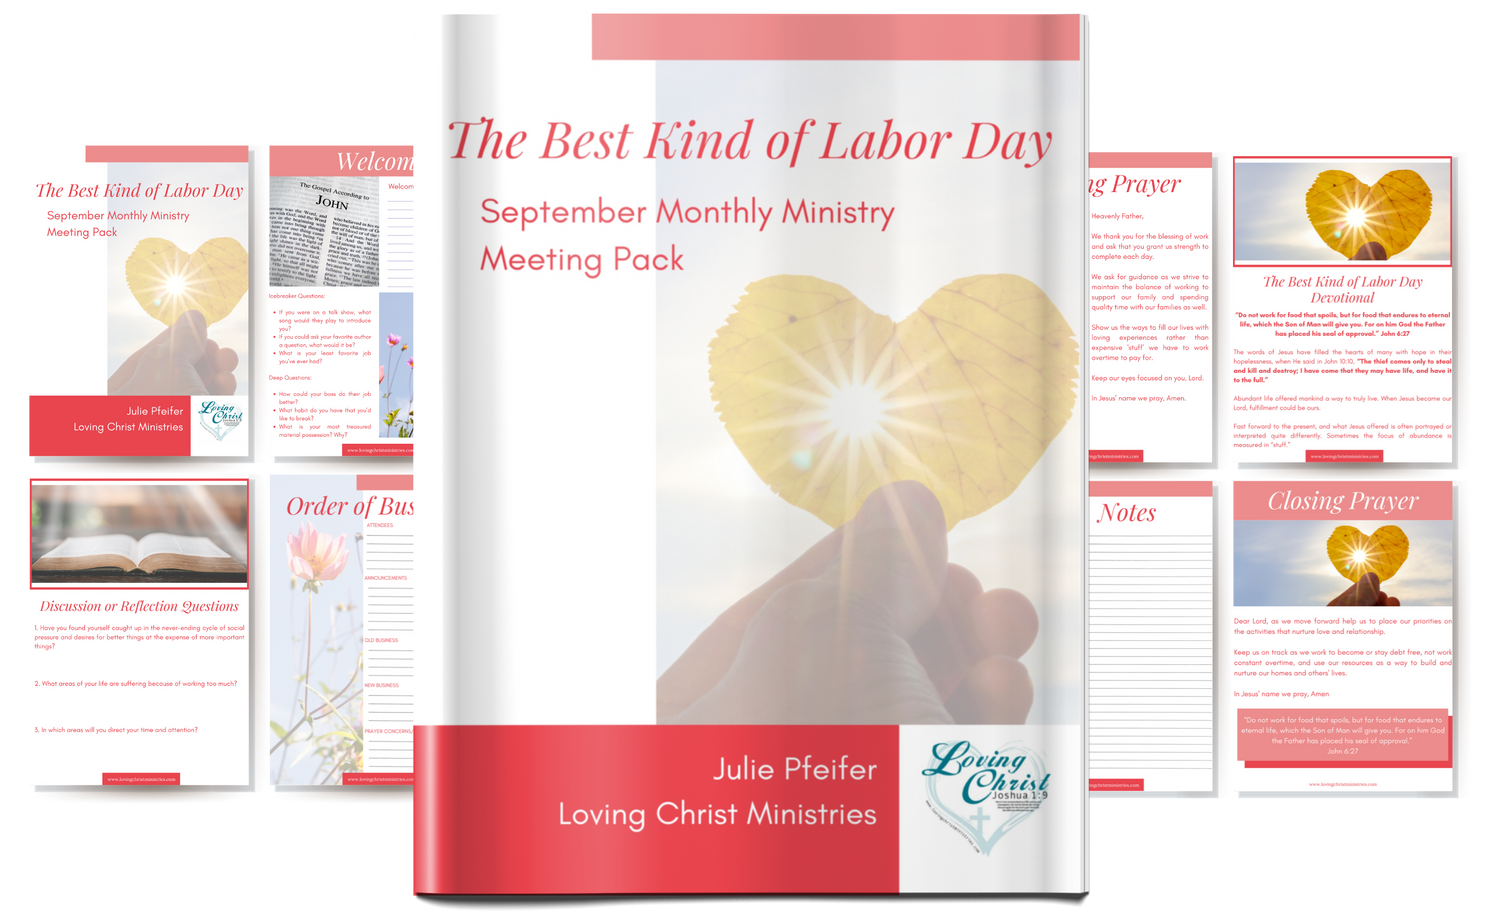 September Monthly Ministry Meeting Pack - The Best Kind of Labor Day